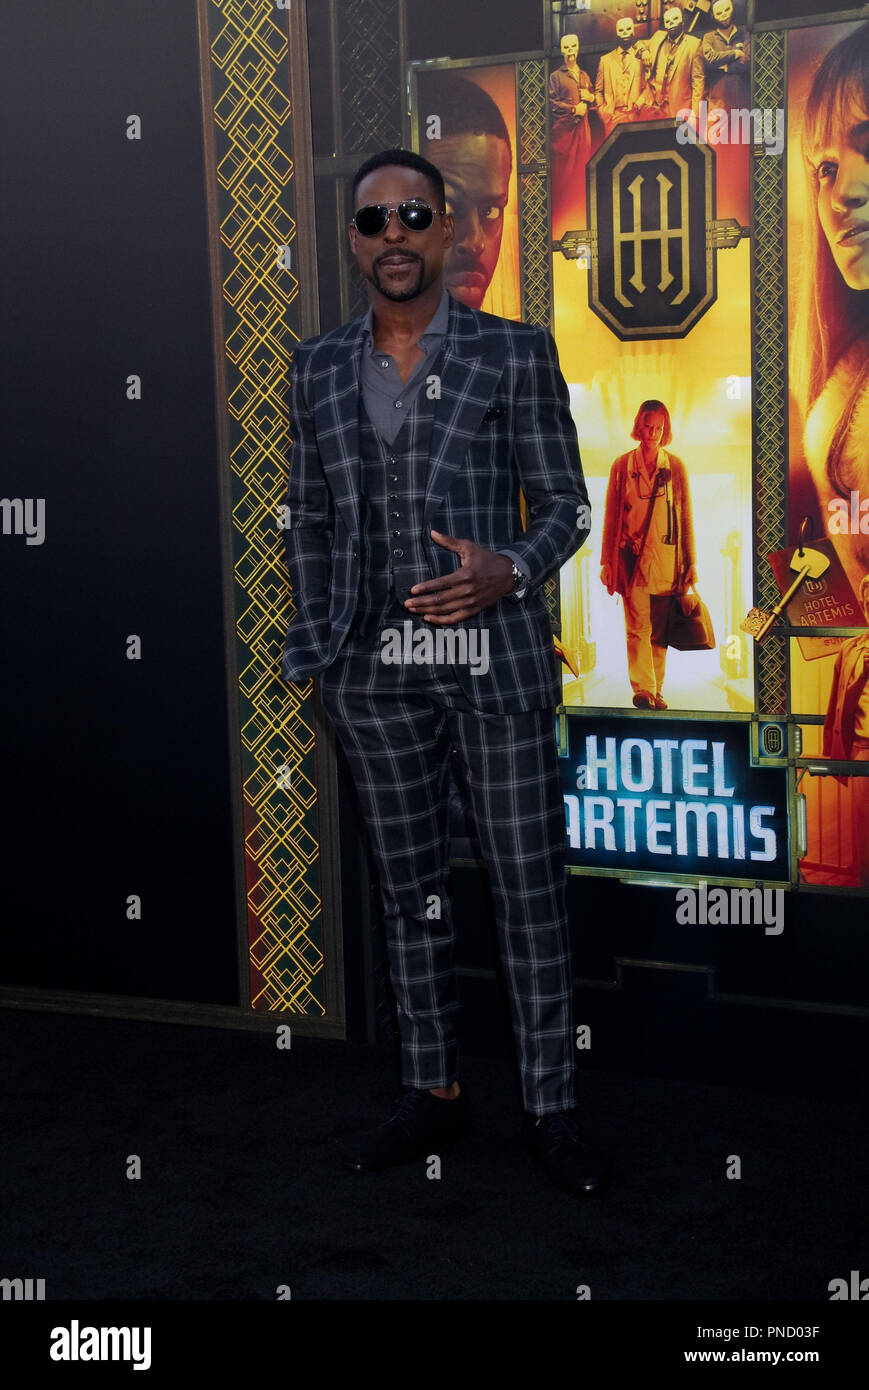 Sterling K. Brown  05/19/2018 The Los Angeles premiere of 'Hotel Artemis' held at the Regency Bruin Theatre in Los Angeles, CA Photo by Izumi Hasegawa / HNW / PictureLux Stock Photo